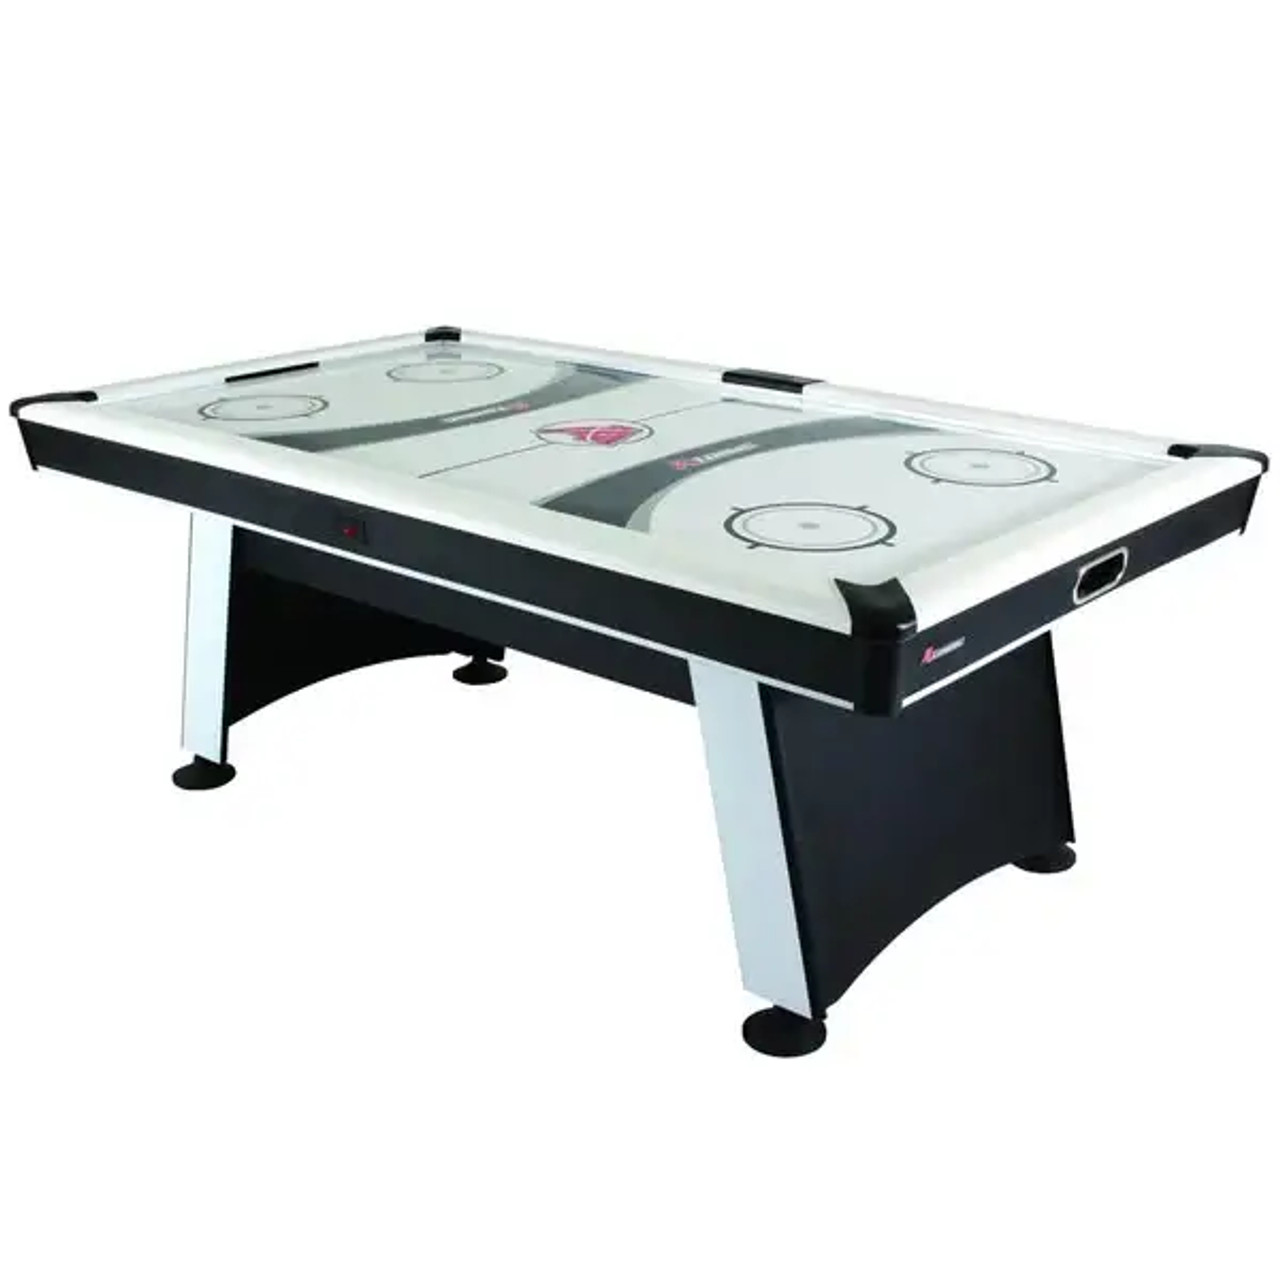 Atomic Blazer 7' Fast-Paced Heavy-Duty Air Hockey Table-Chicken Pieces